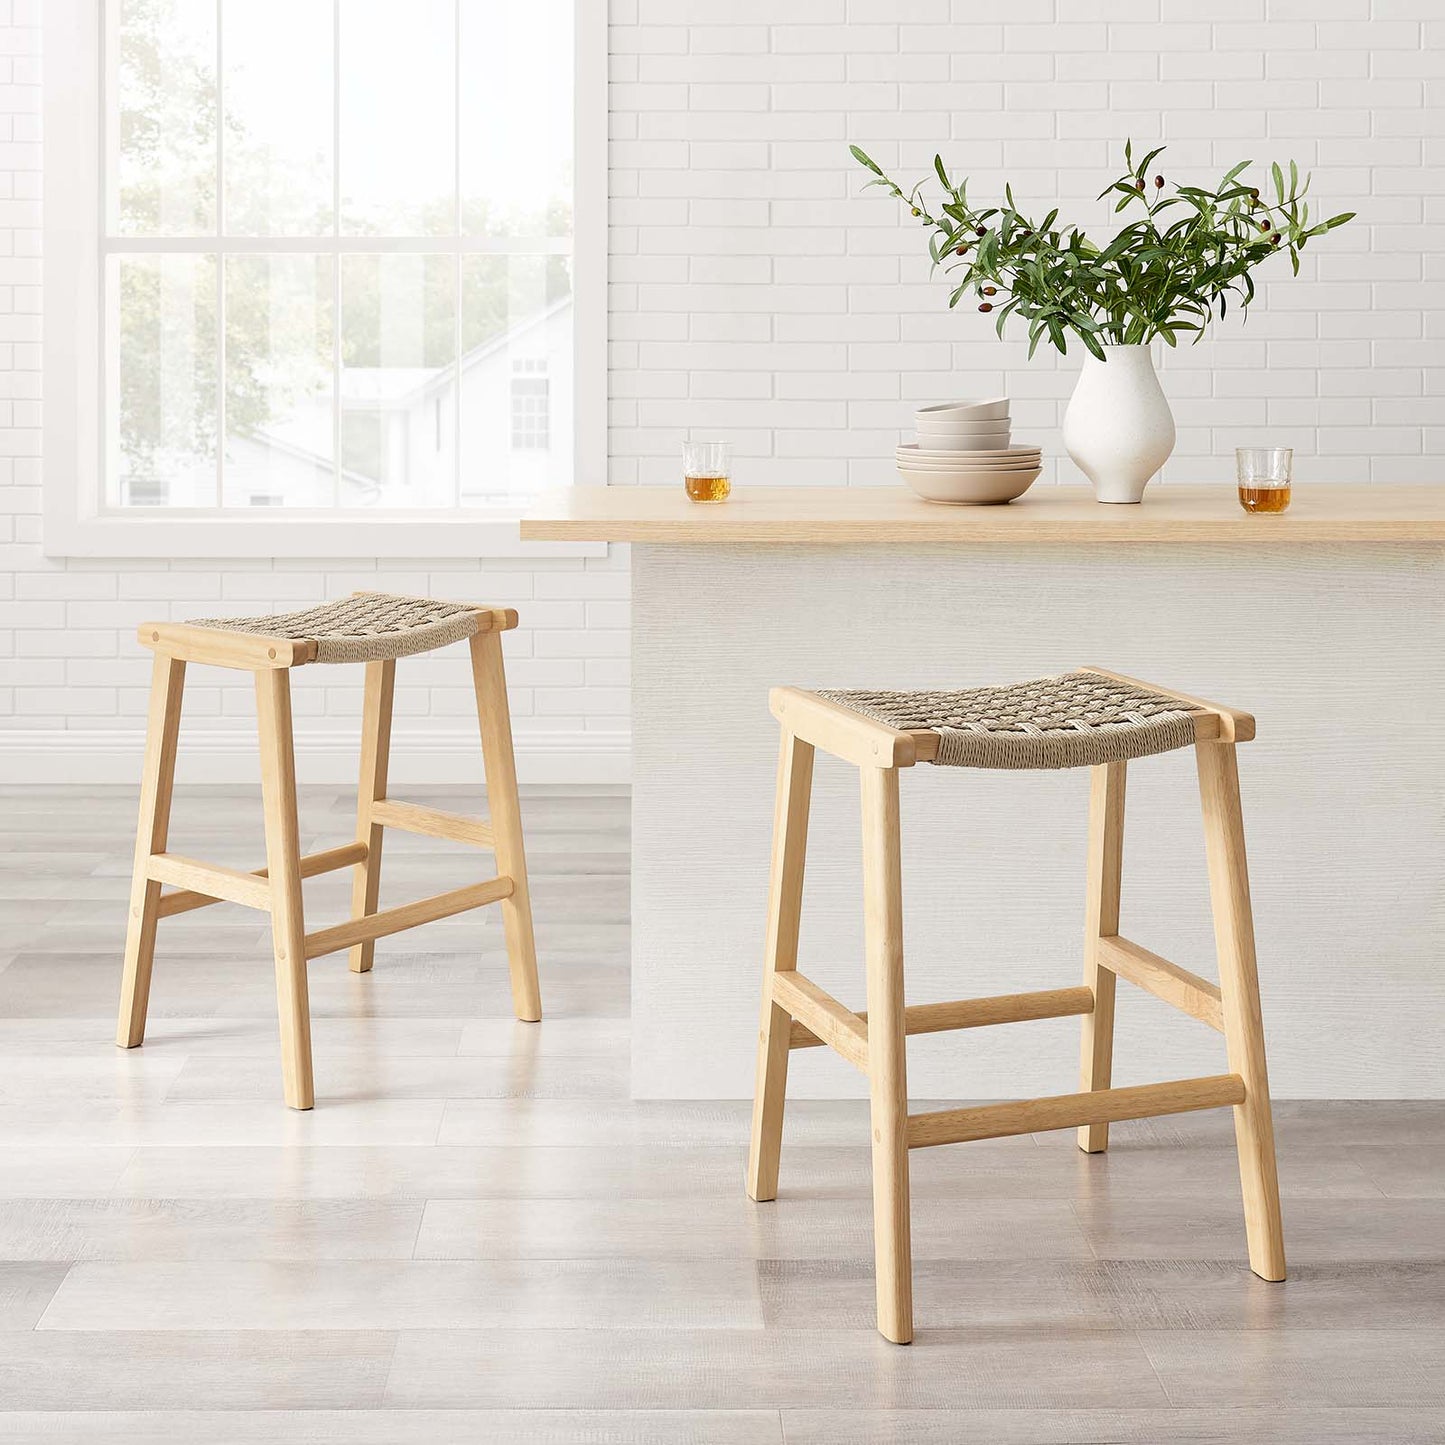 Saoirse Woven Rope Wood Counter Stool - Set of 2 By Modway - EEI-6548 | Counter Stools | Modway - 16